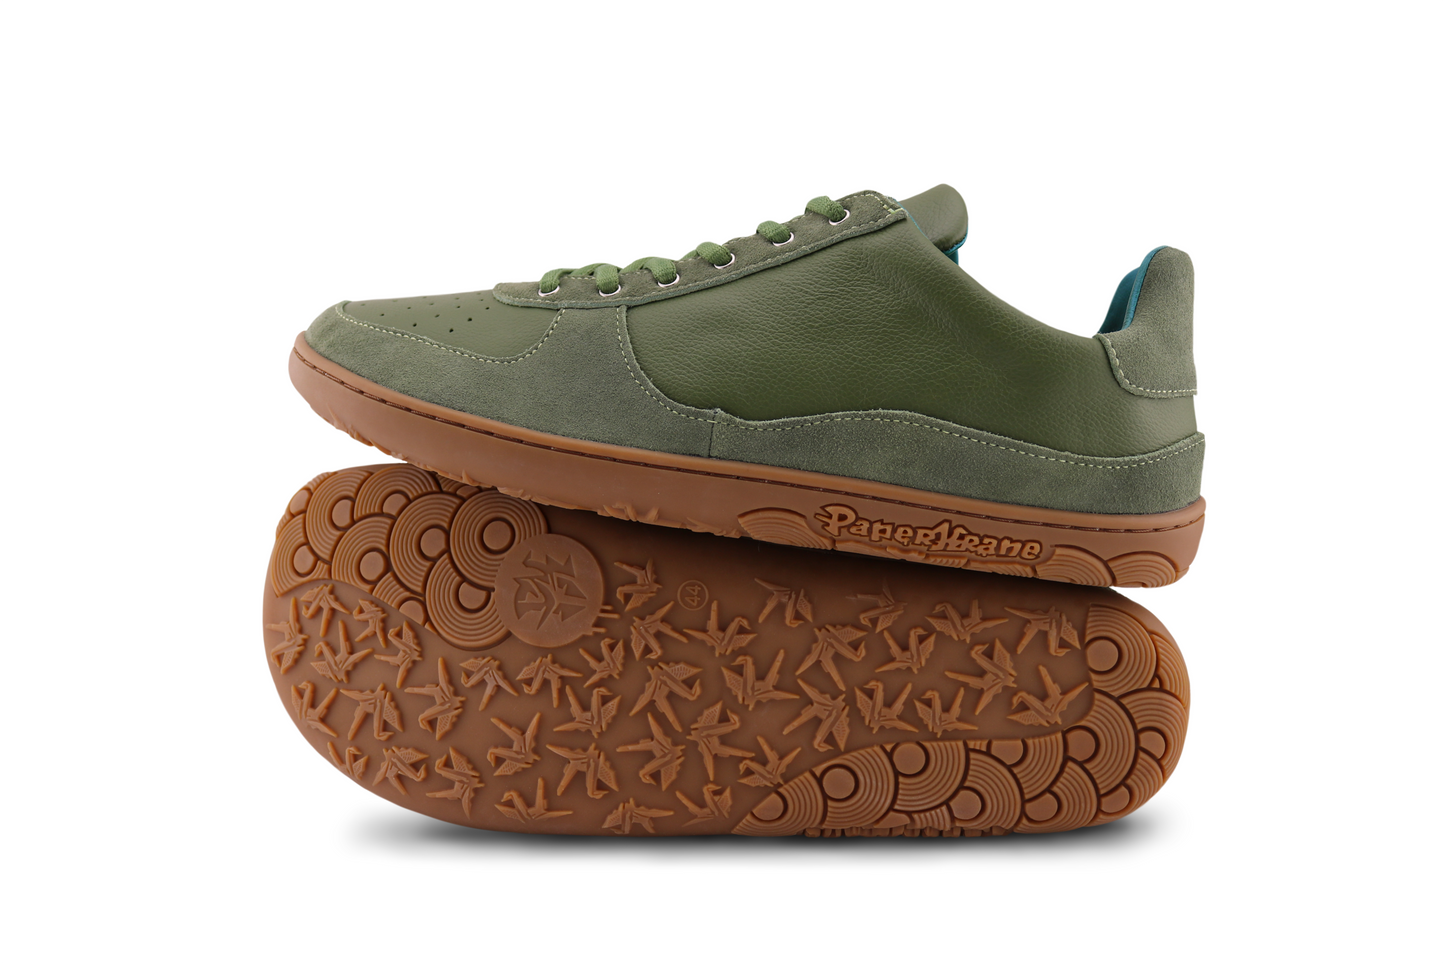 VIEW OF KHAKI LOWS SIDE AND SOLE